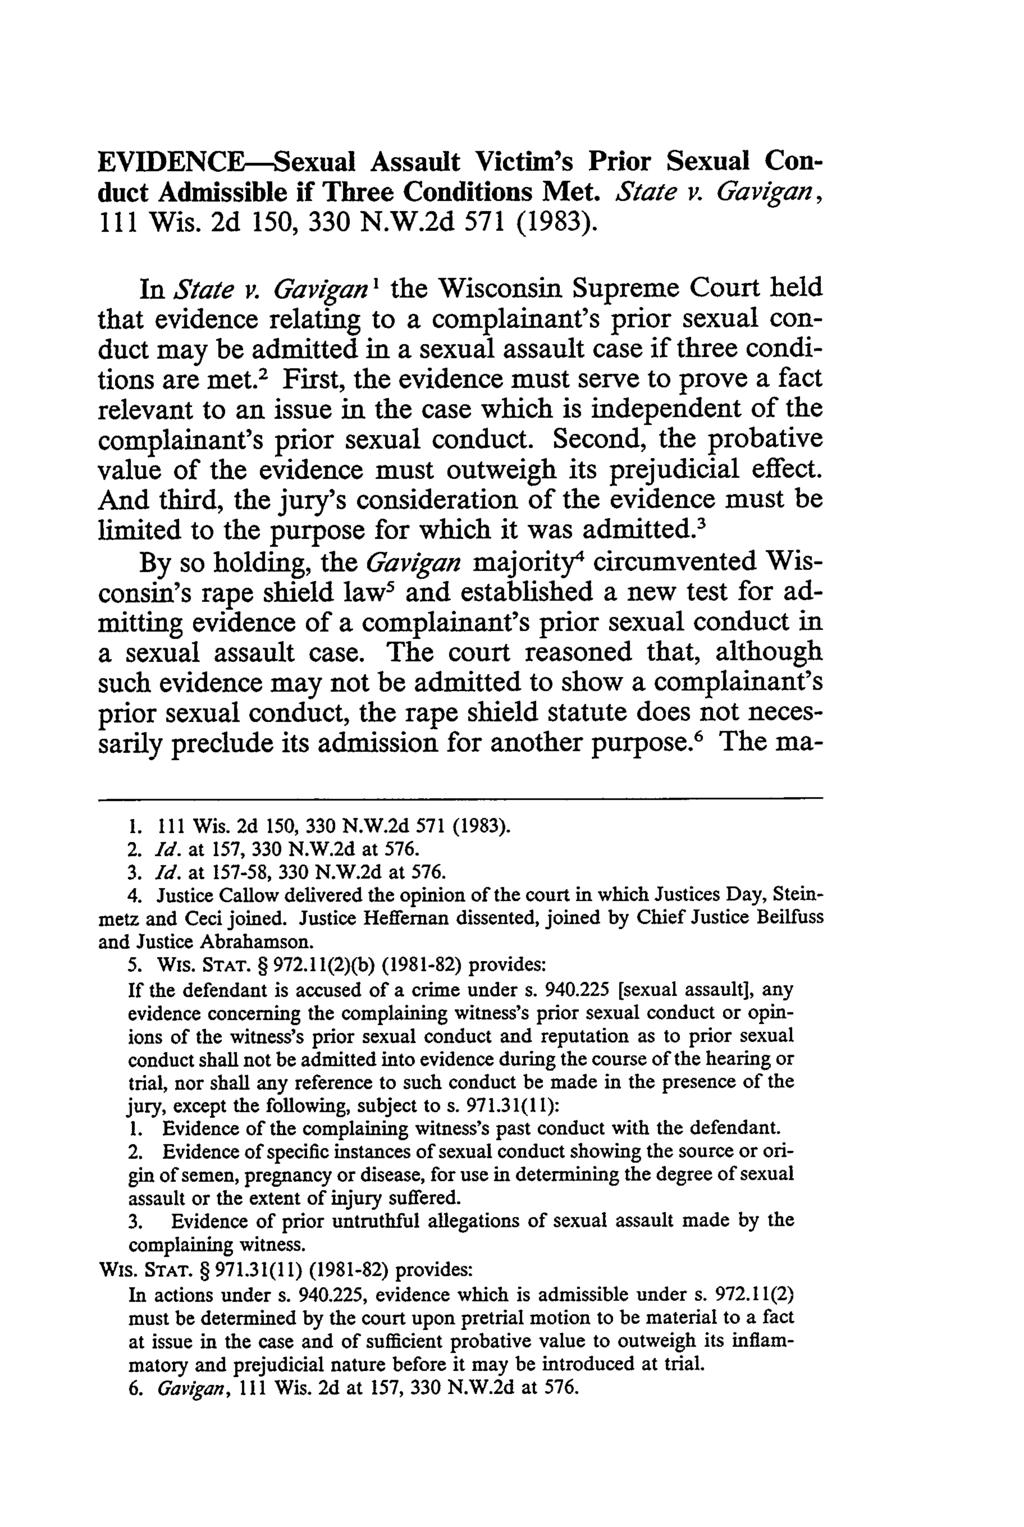 EVIDENCE-Sexual Assault Victim's Prior Sexual Conduct Admissible if Three Conditions Met. State v. Gavigan, 111 Wis. 2d 150, 330 N.W.2d 571 (1983). In State v.